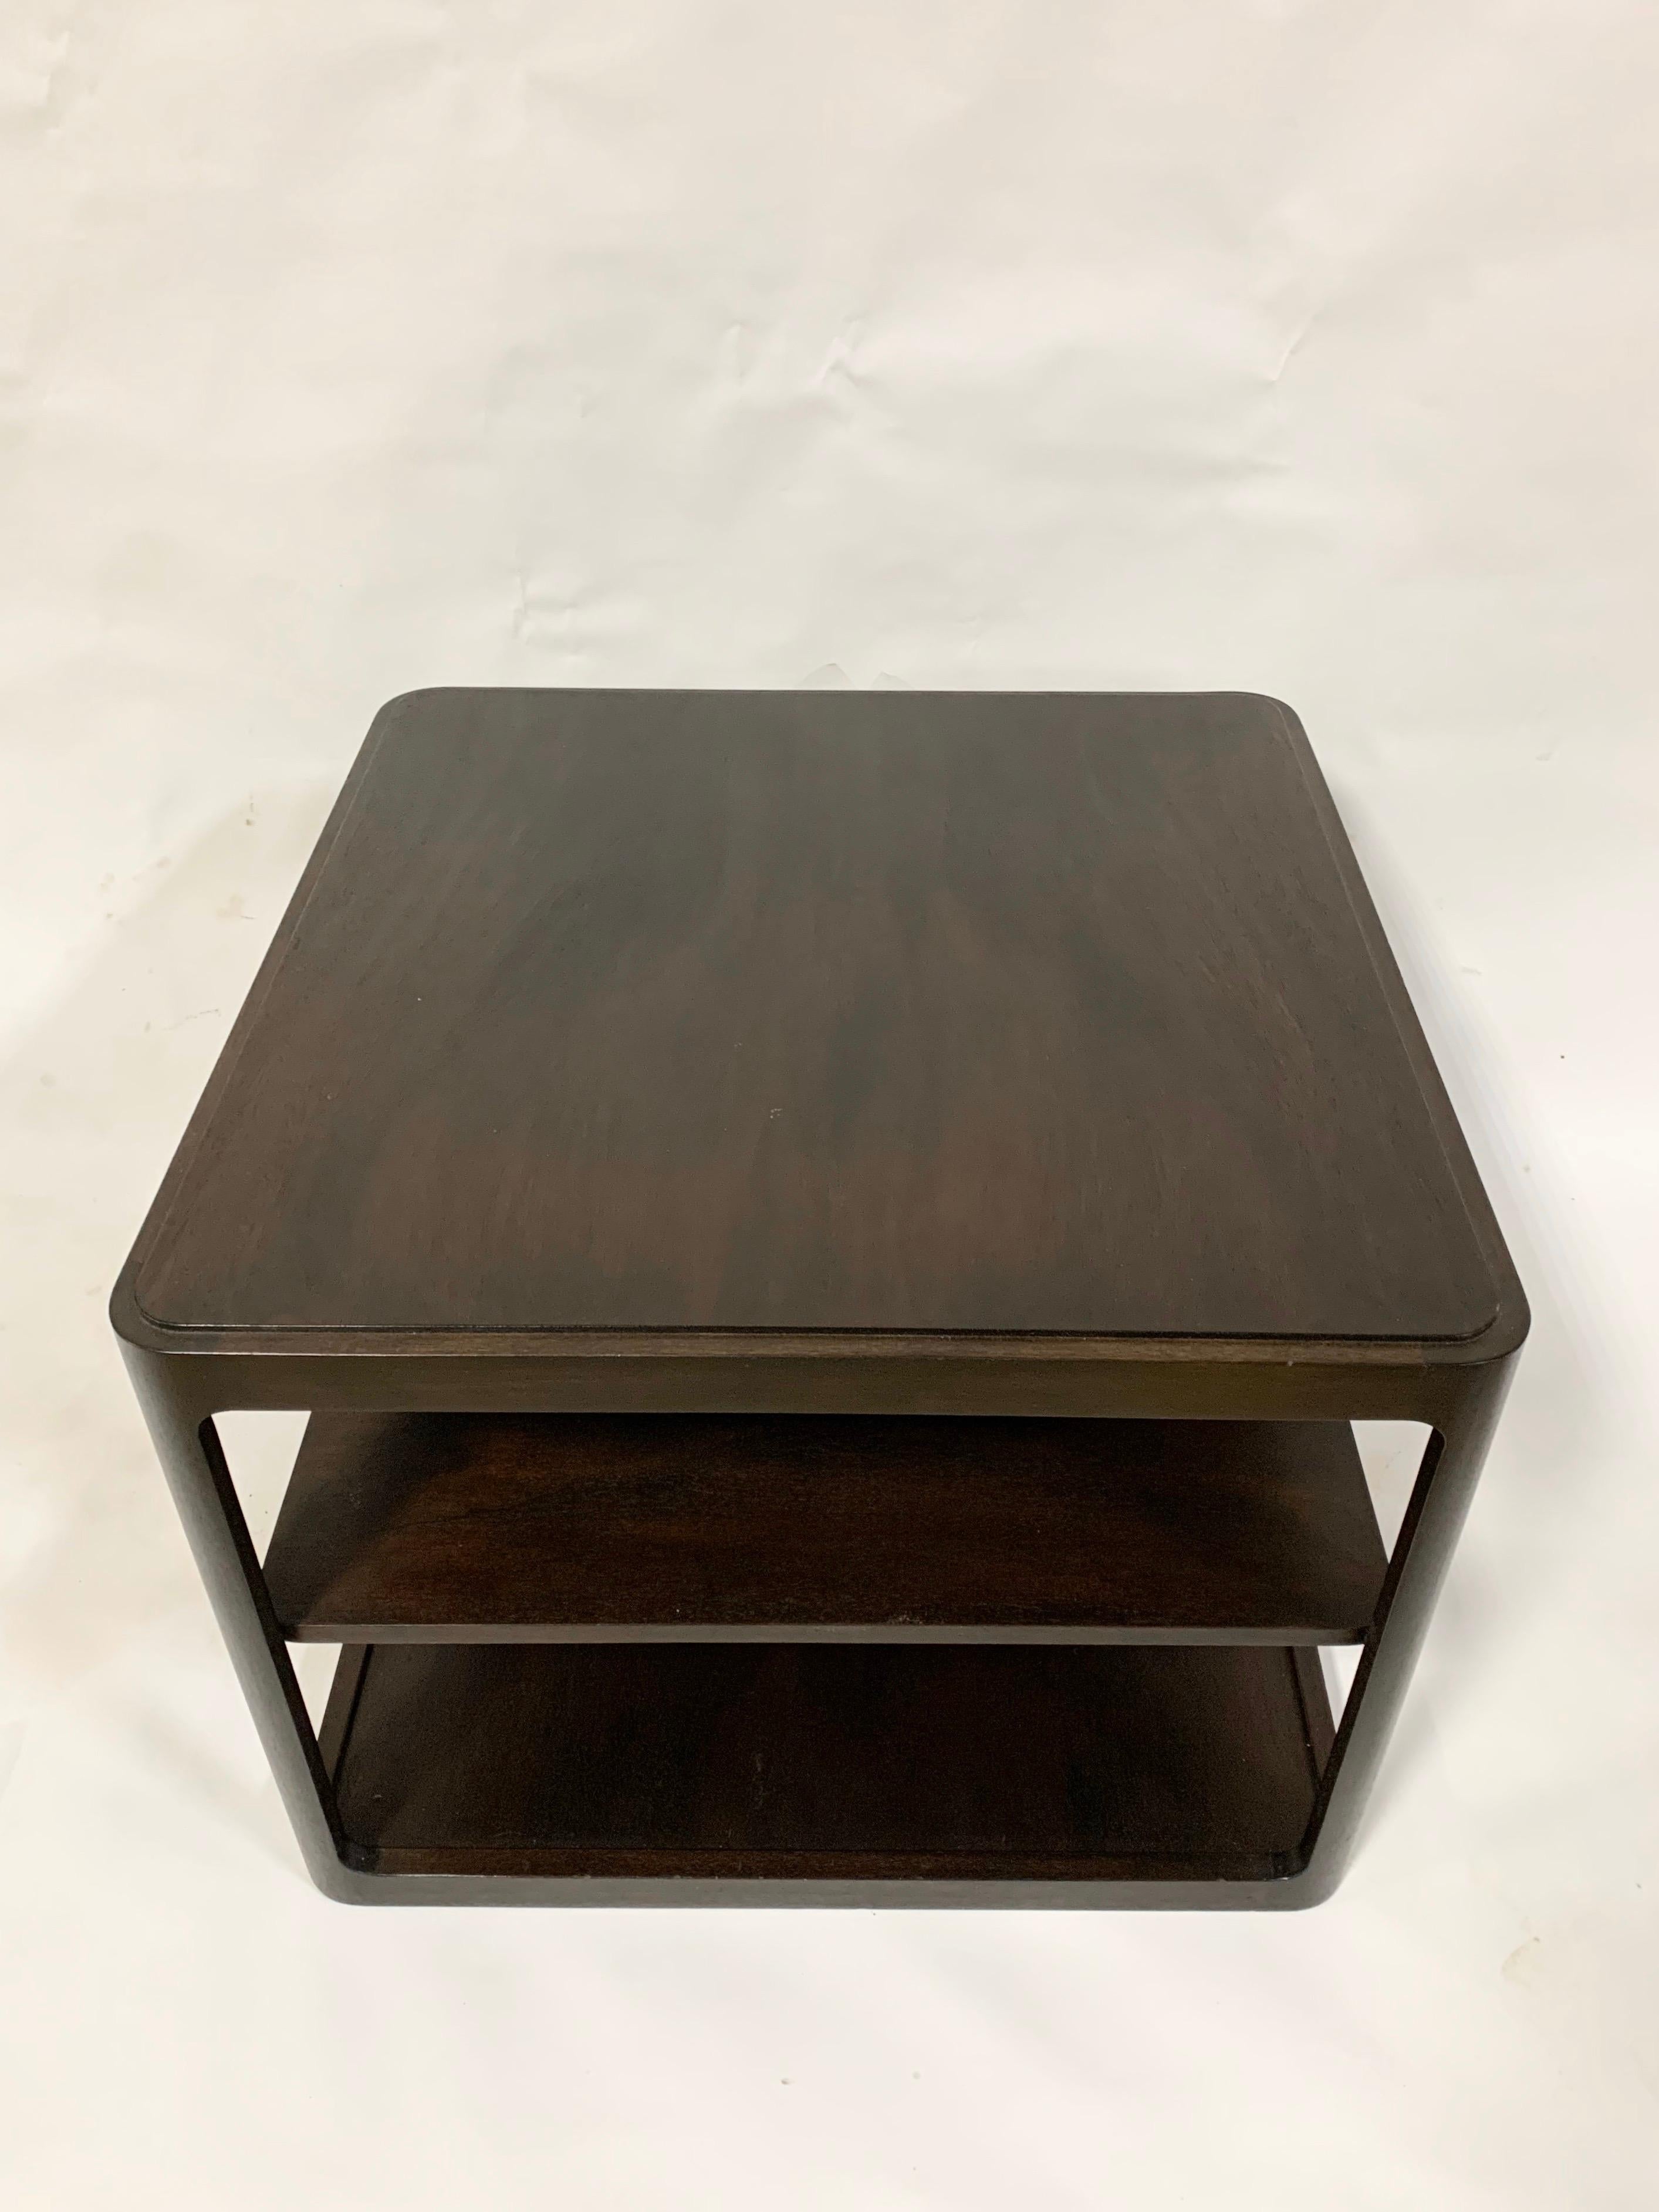 North American Dunbar Edward Wormley Midcentury Square End Table